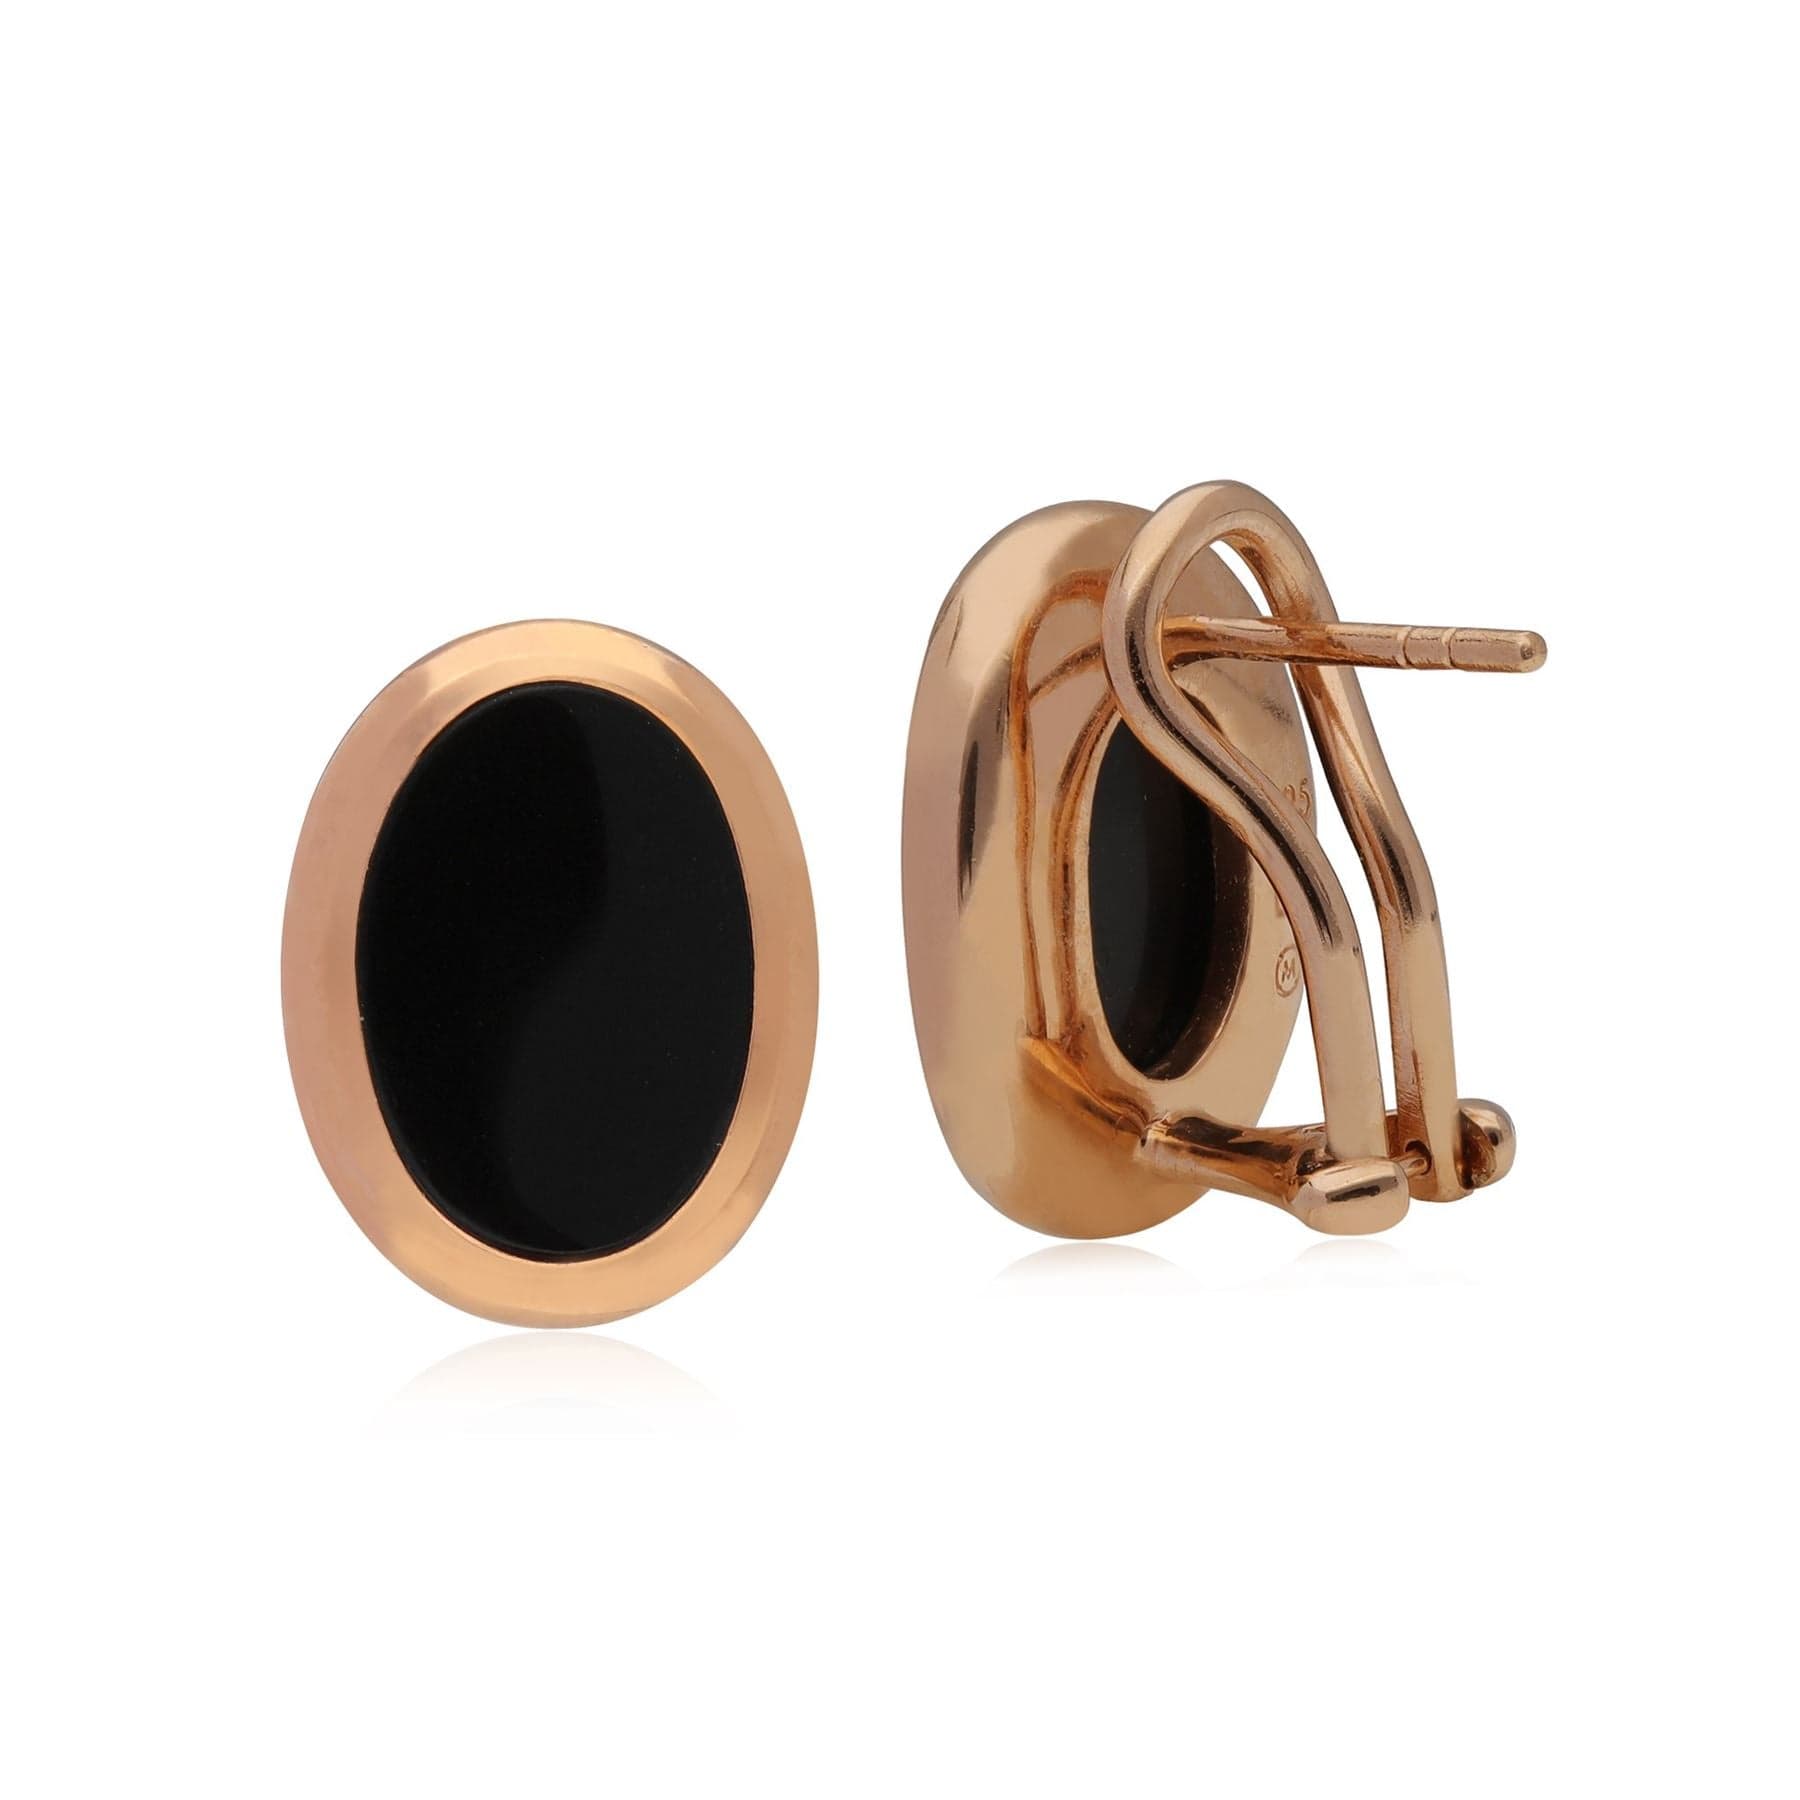 T1089E9013 Kosmos Black Onyx Stud Earrings in Rose Gold Plated 925 Sterling Silver 2